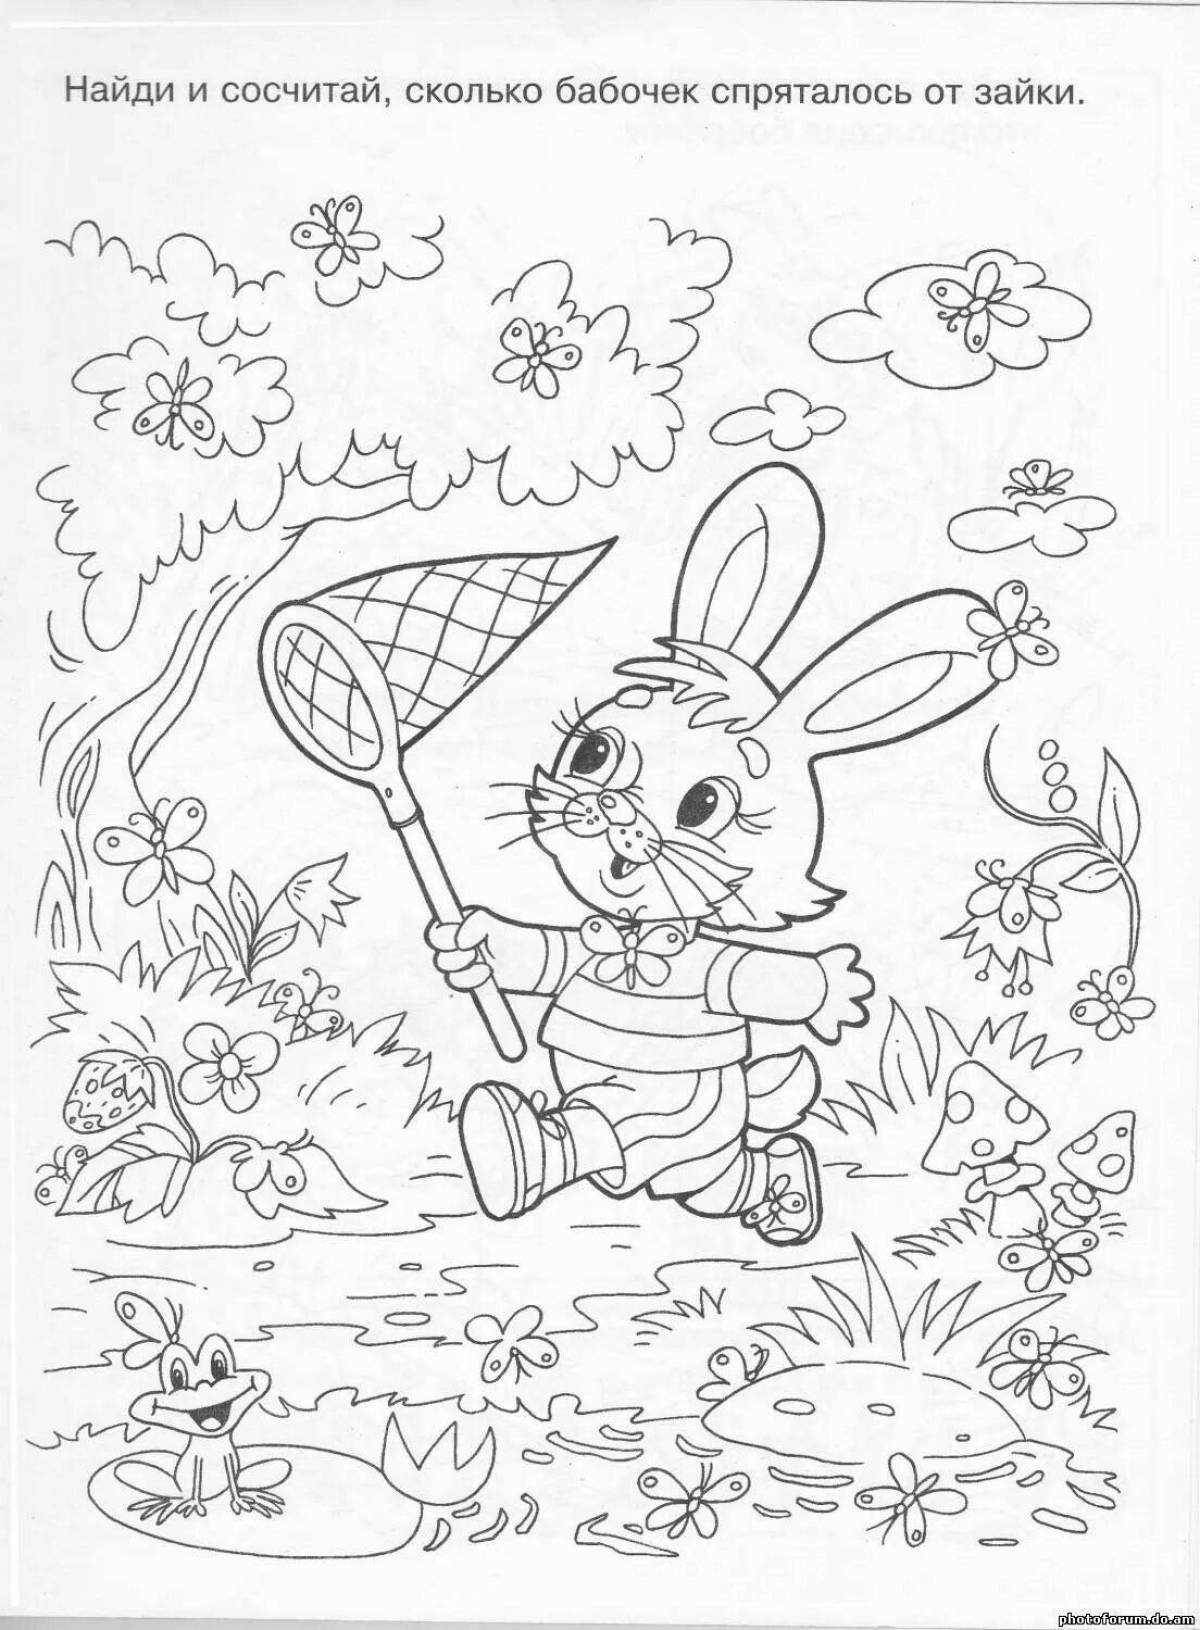 An entertaining coloring book for children